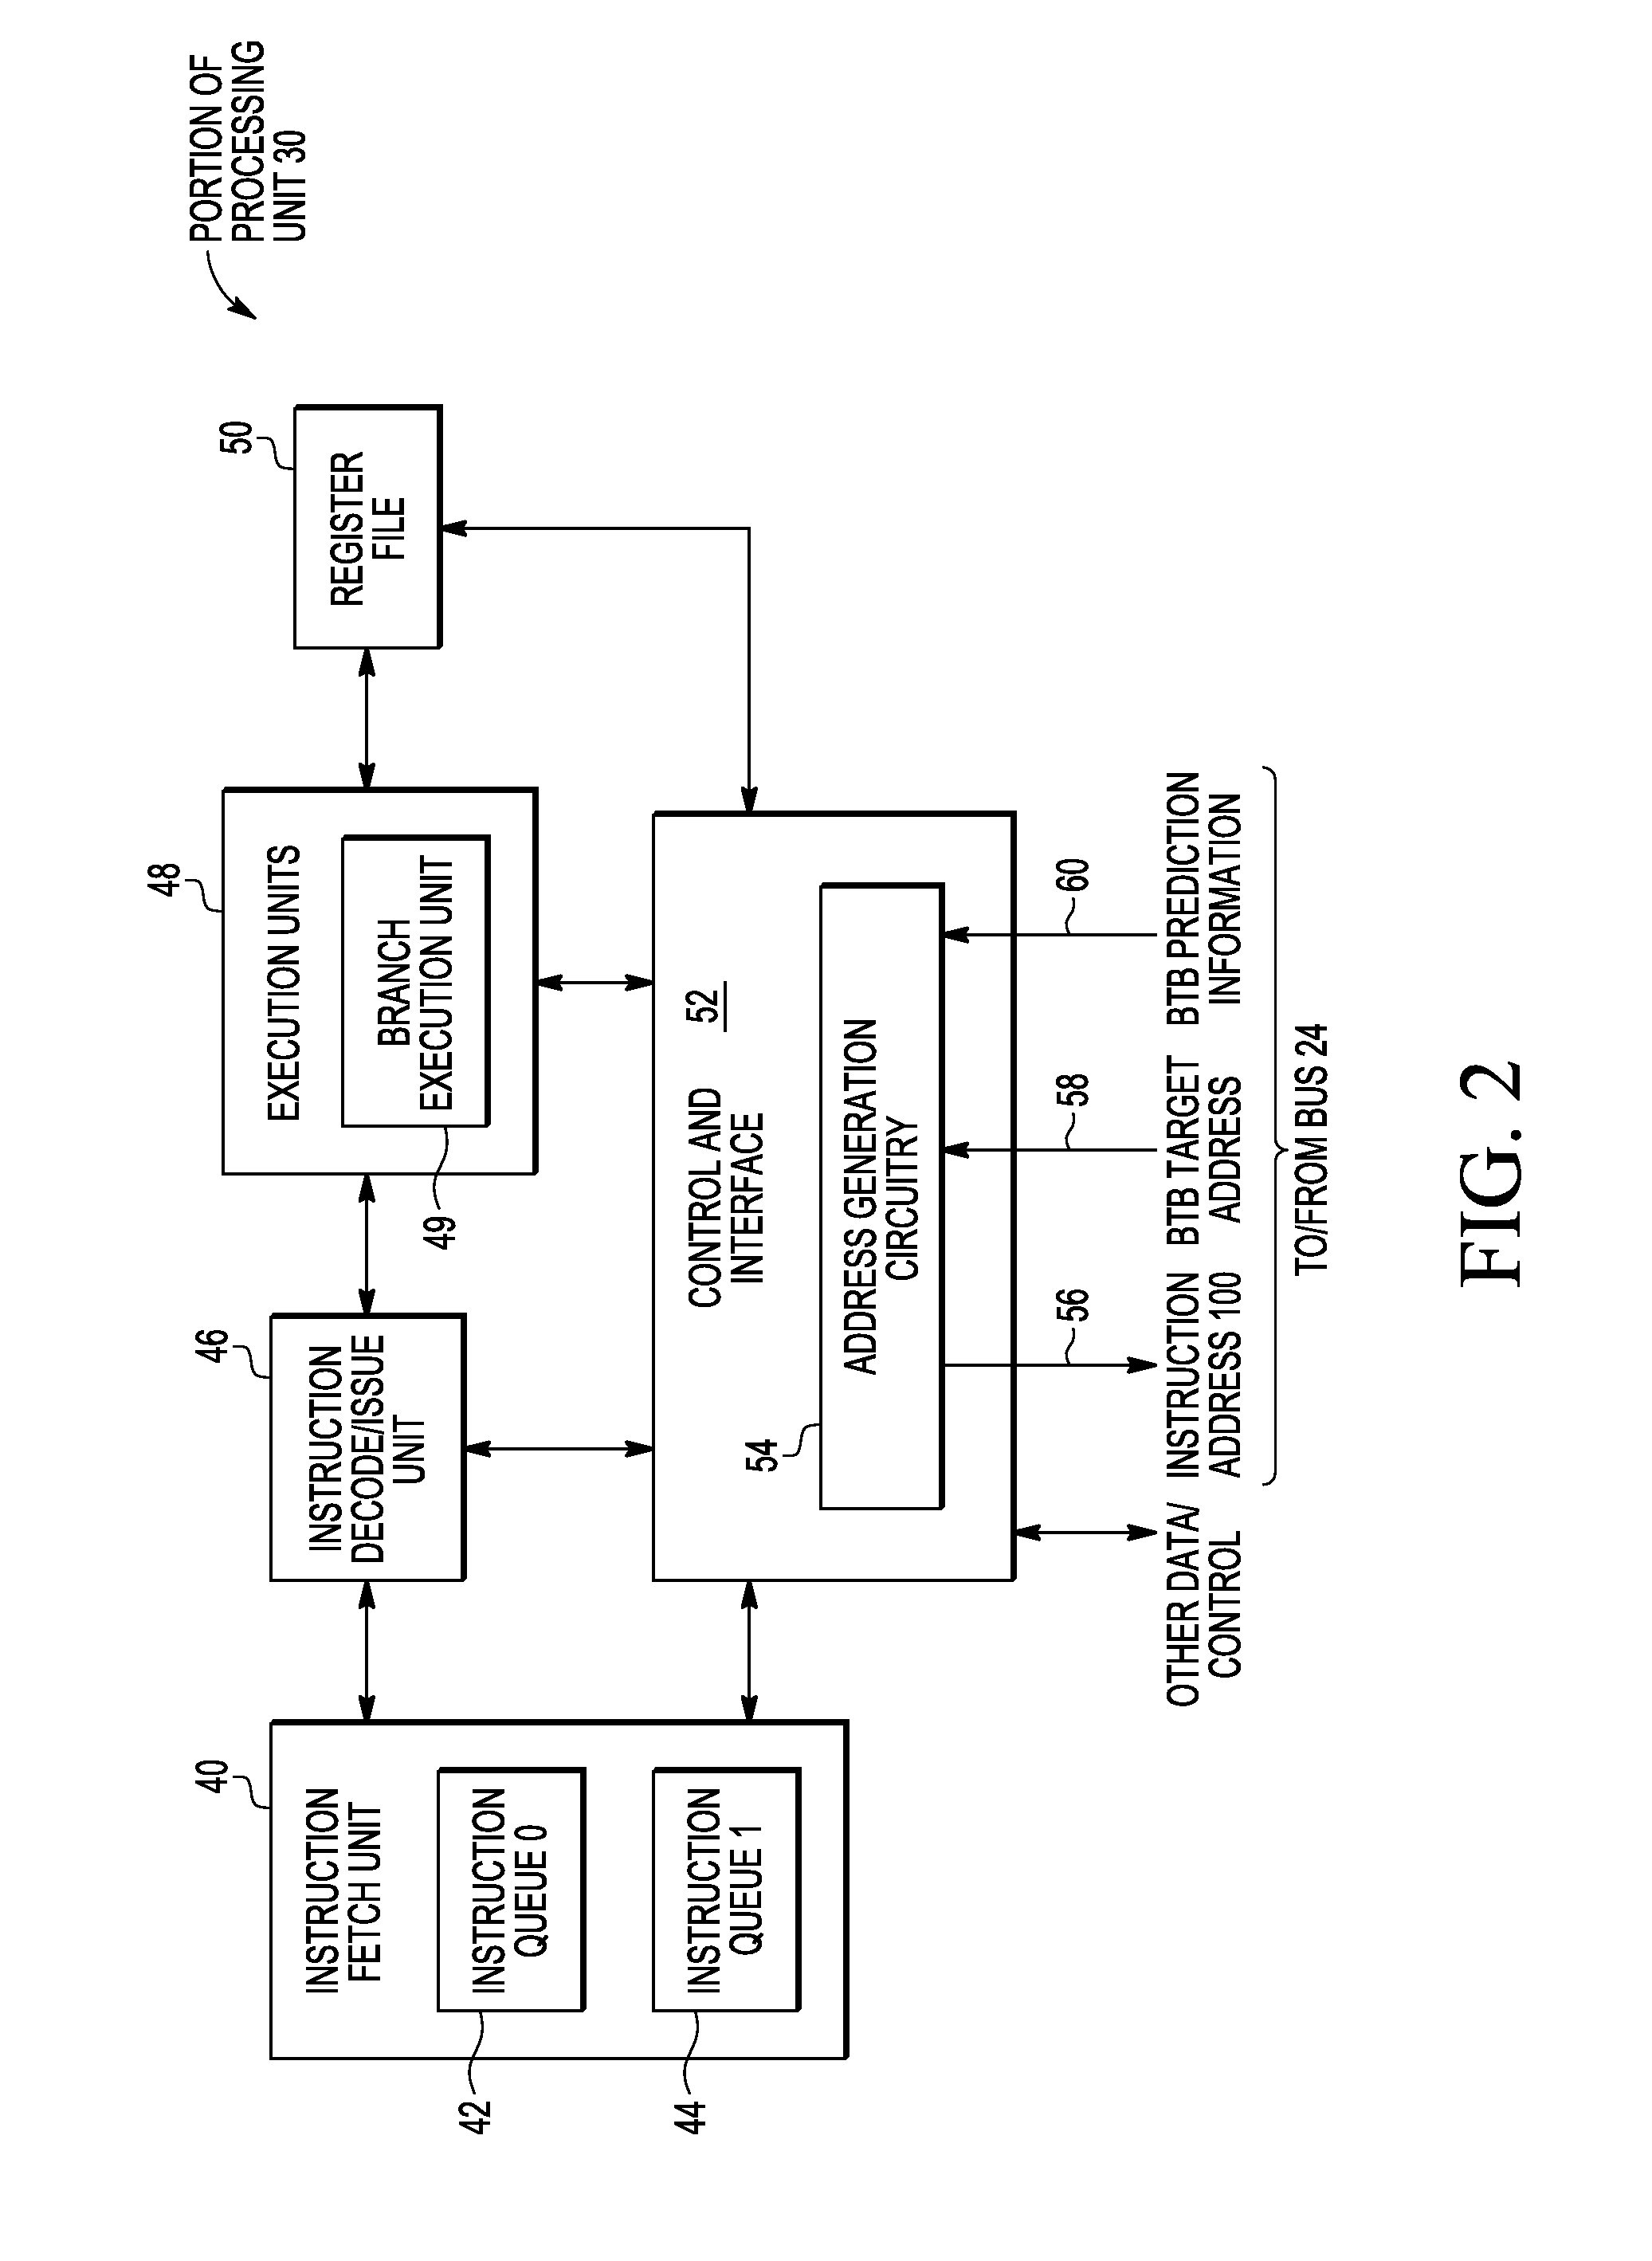 Systems and methods for reducing branch misprediction penalty